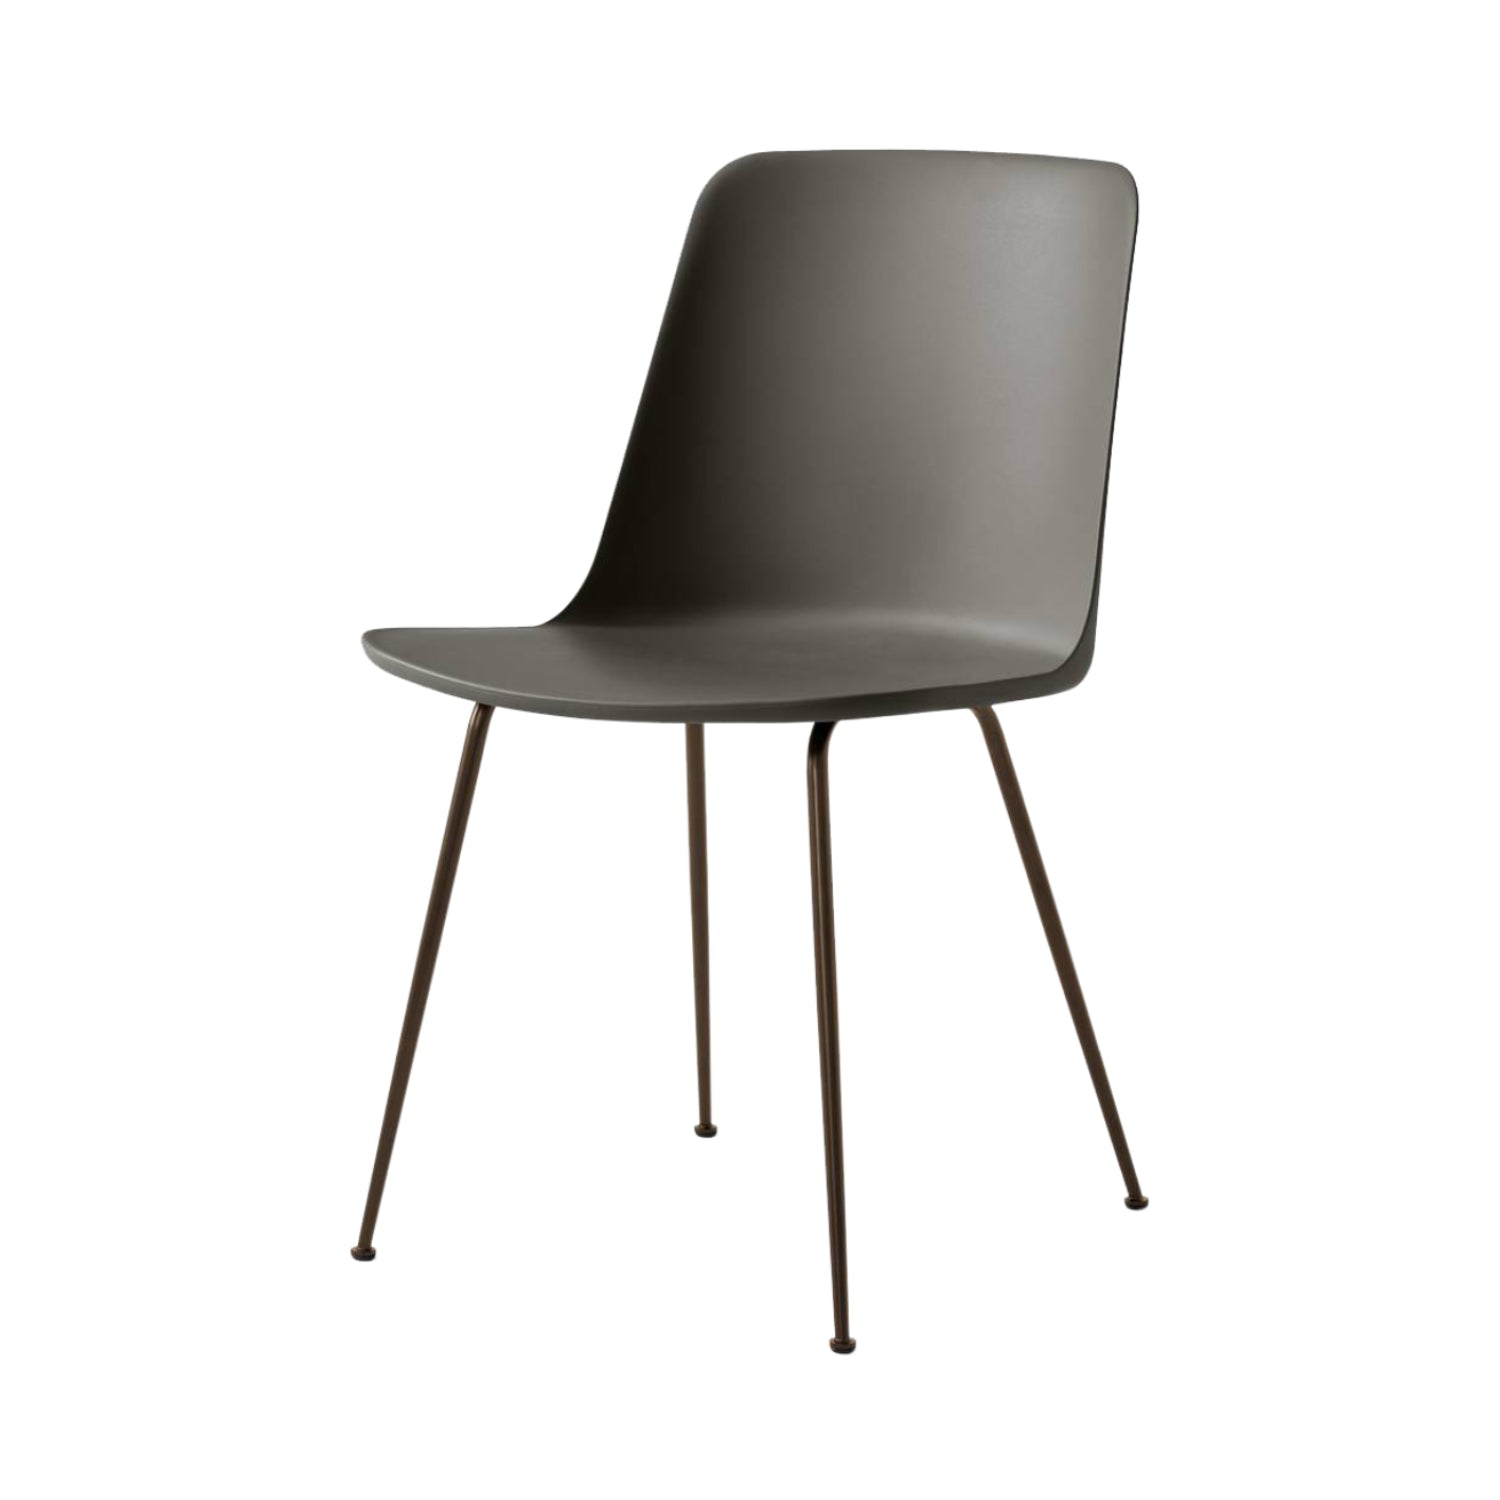 Rely Chair HW6: Stone Grey + Bronzed